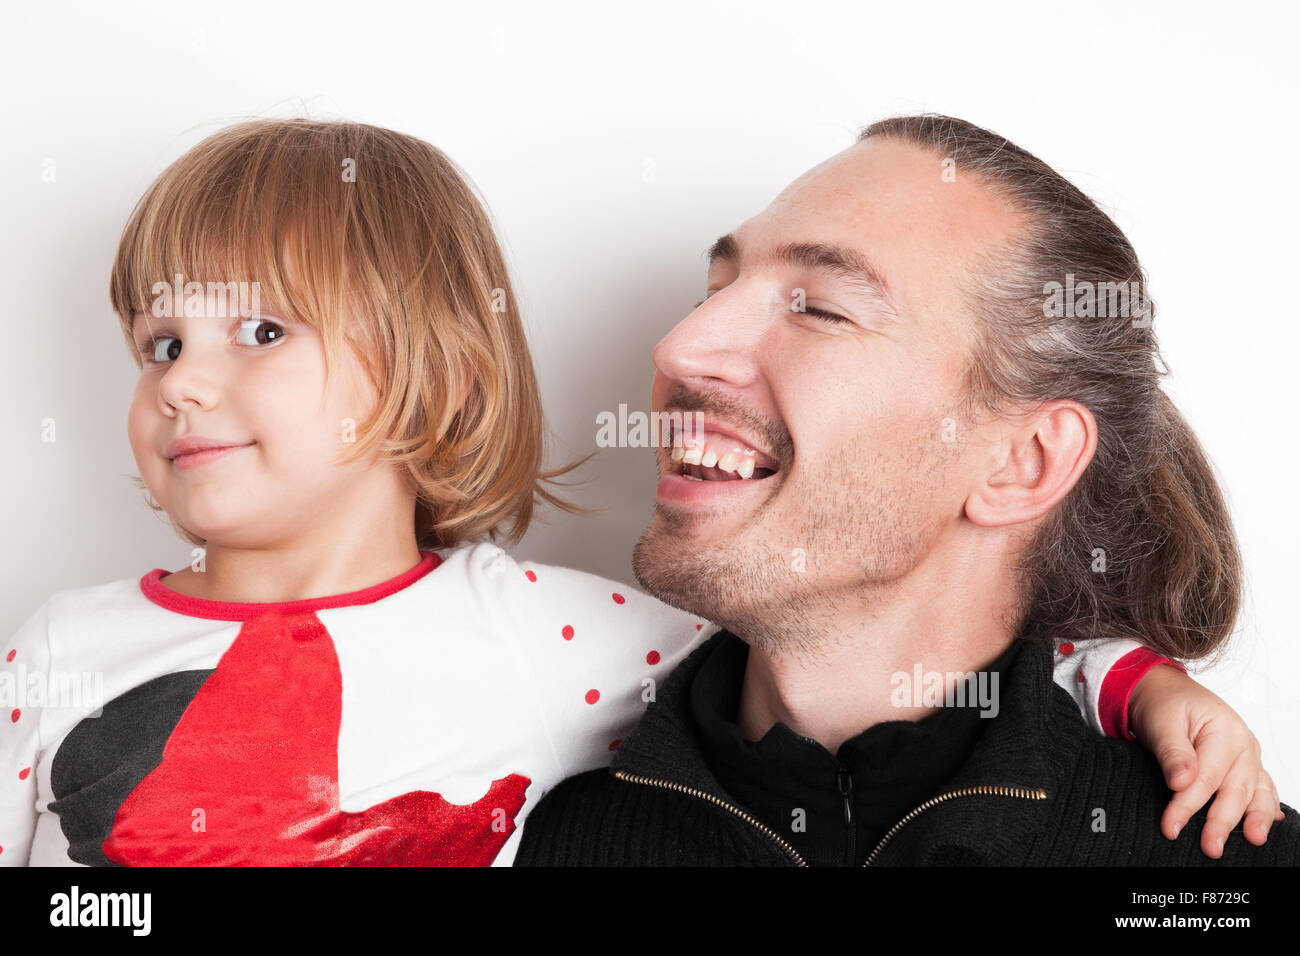 Smiling Young man with little blond Caucasian girl, studio portrait over white wall background Stock Photo